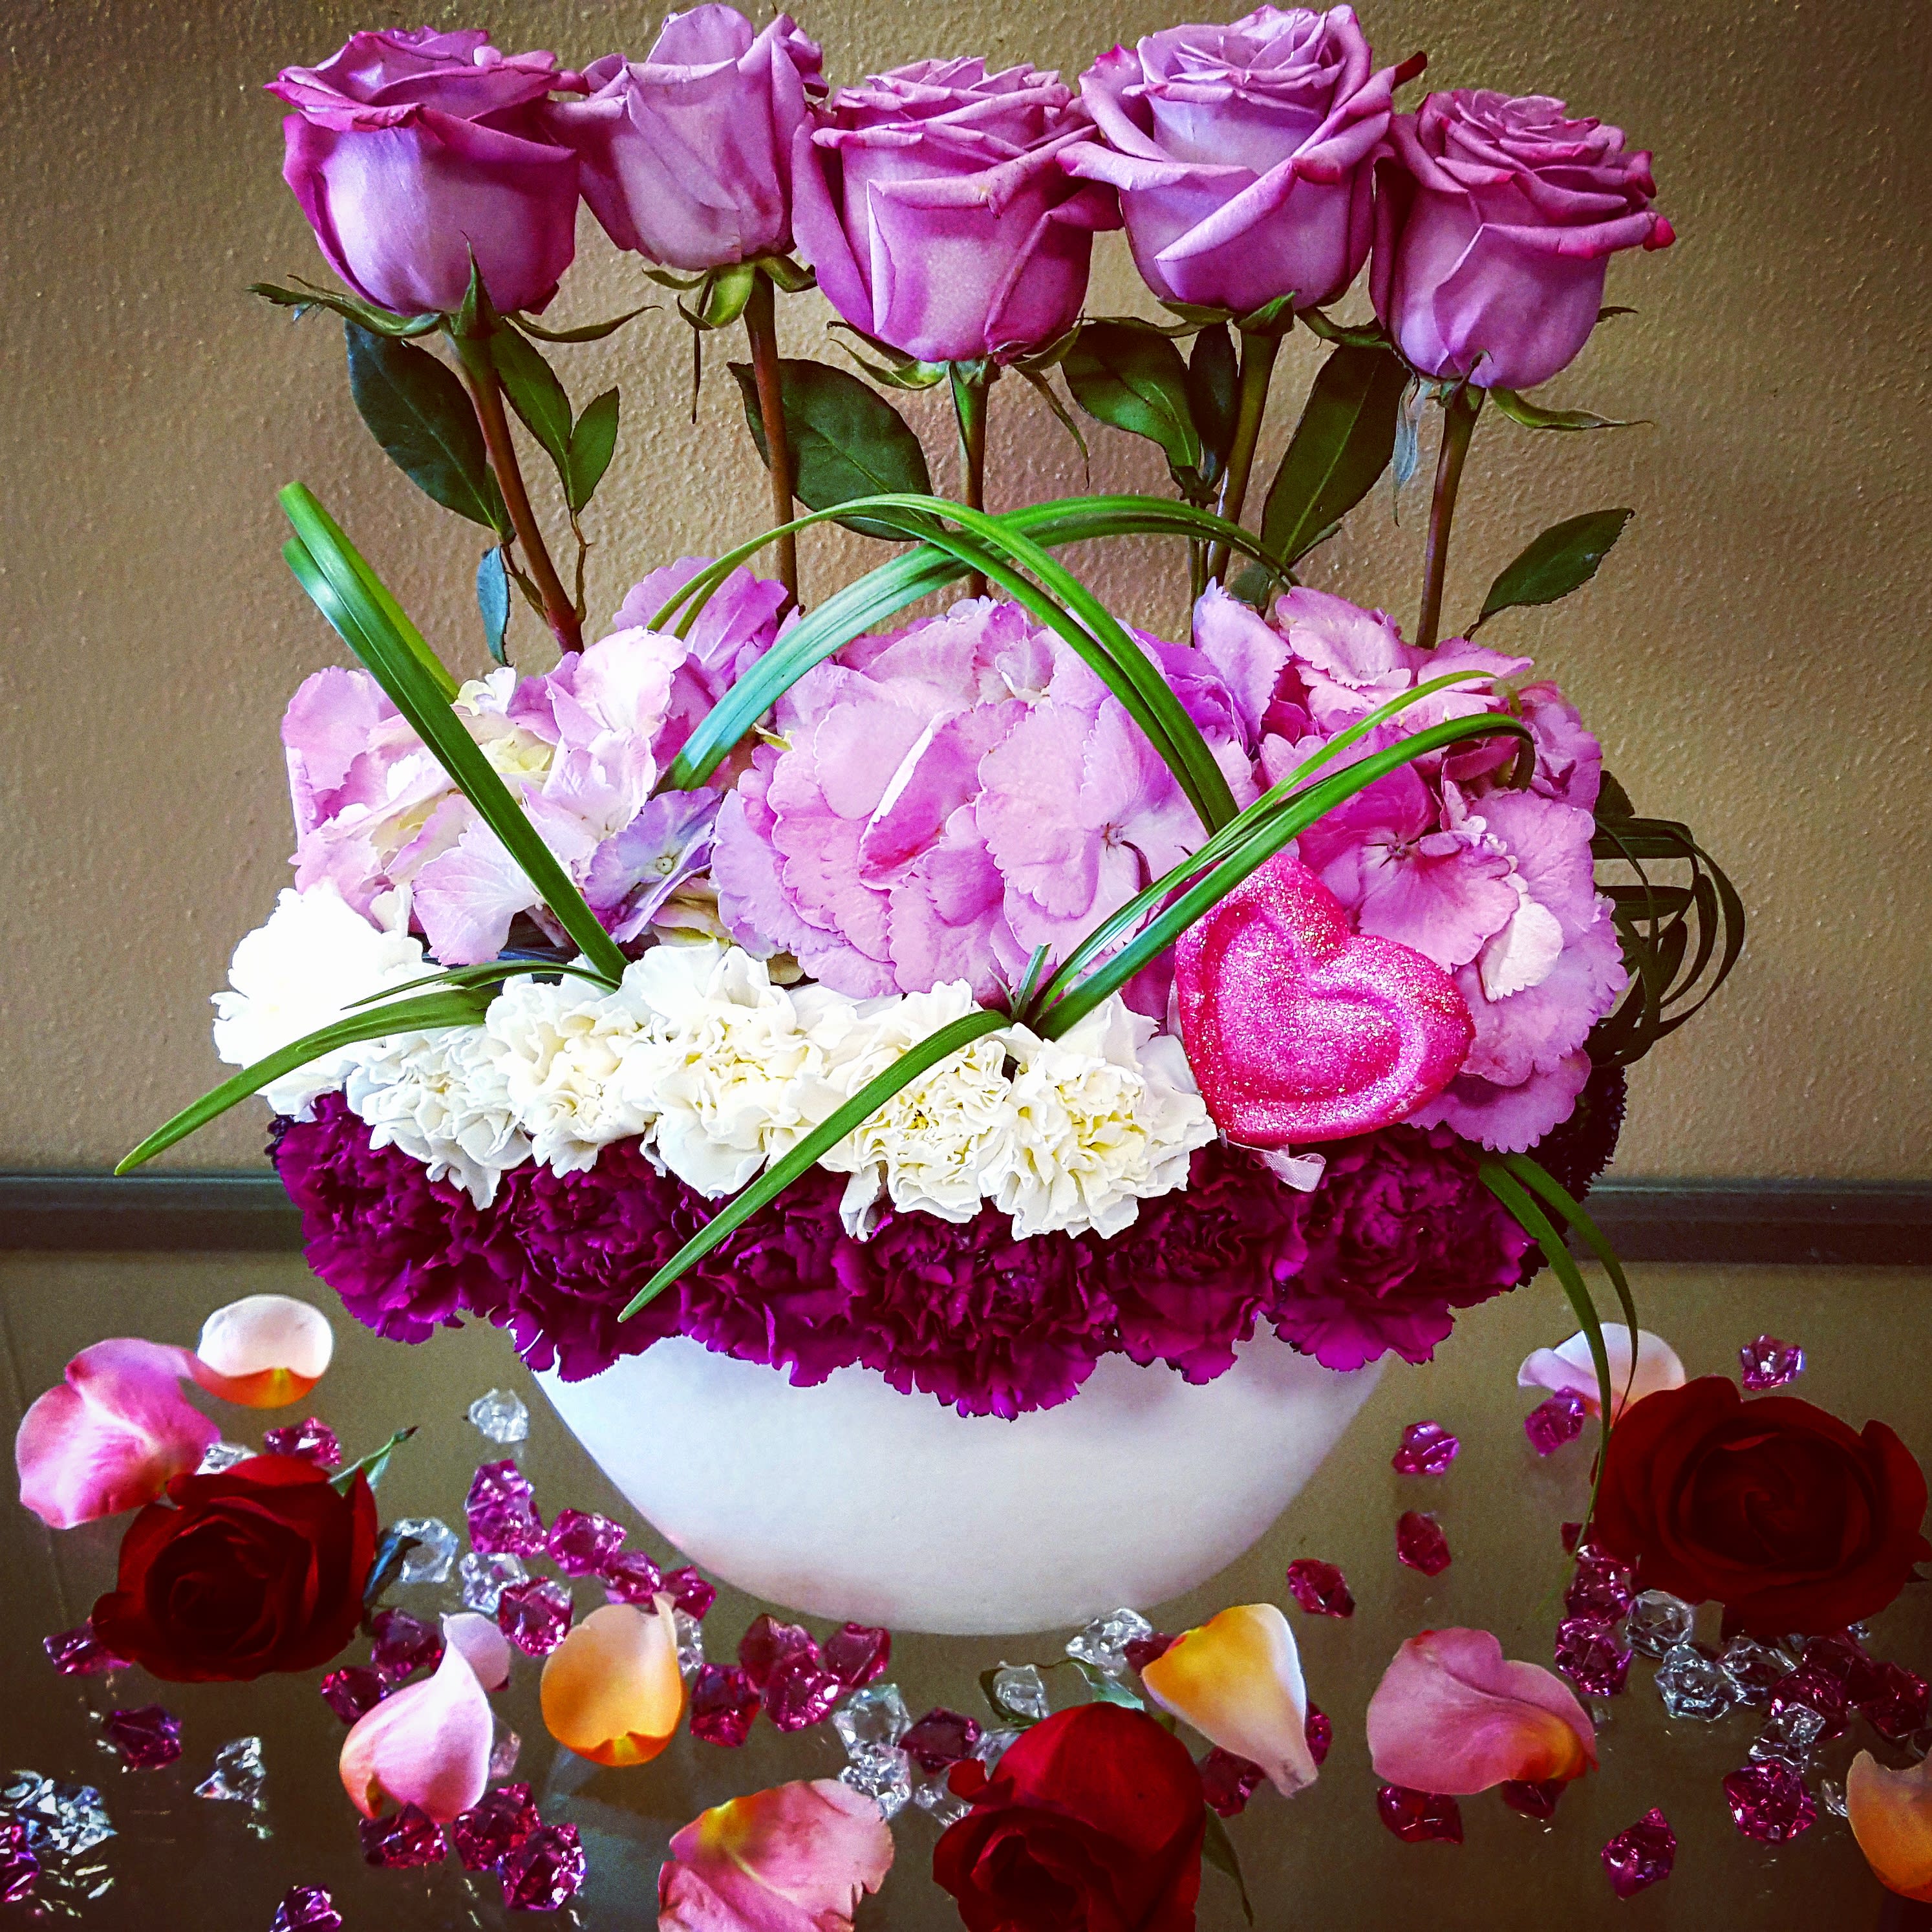 LAYERED ROMANCE - LAVENDER ROSES, PINK HYDRANGEA, AND LAYERS OF WHITE AND MAGENTA CARNATIONS. CRISS- CROSSES OF LILY GRASS PROTECT YOUR LOVES FLOWERS!